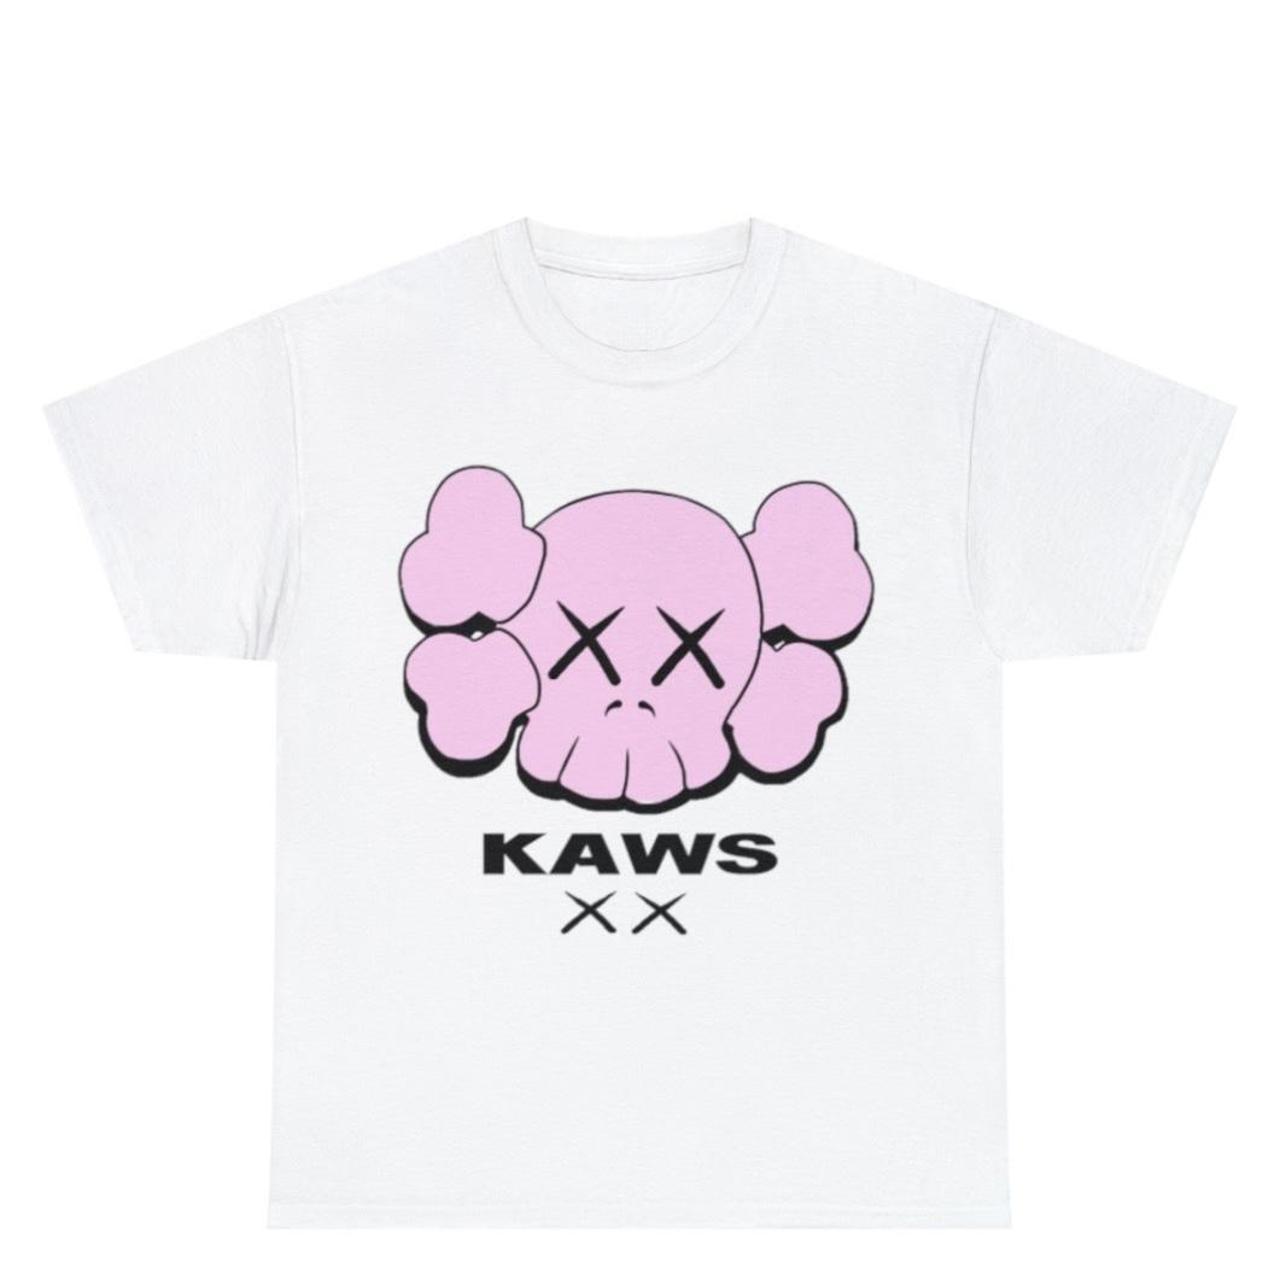 Kaws Women's Pink and White T-shirt